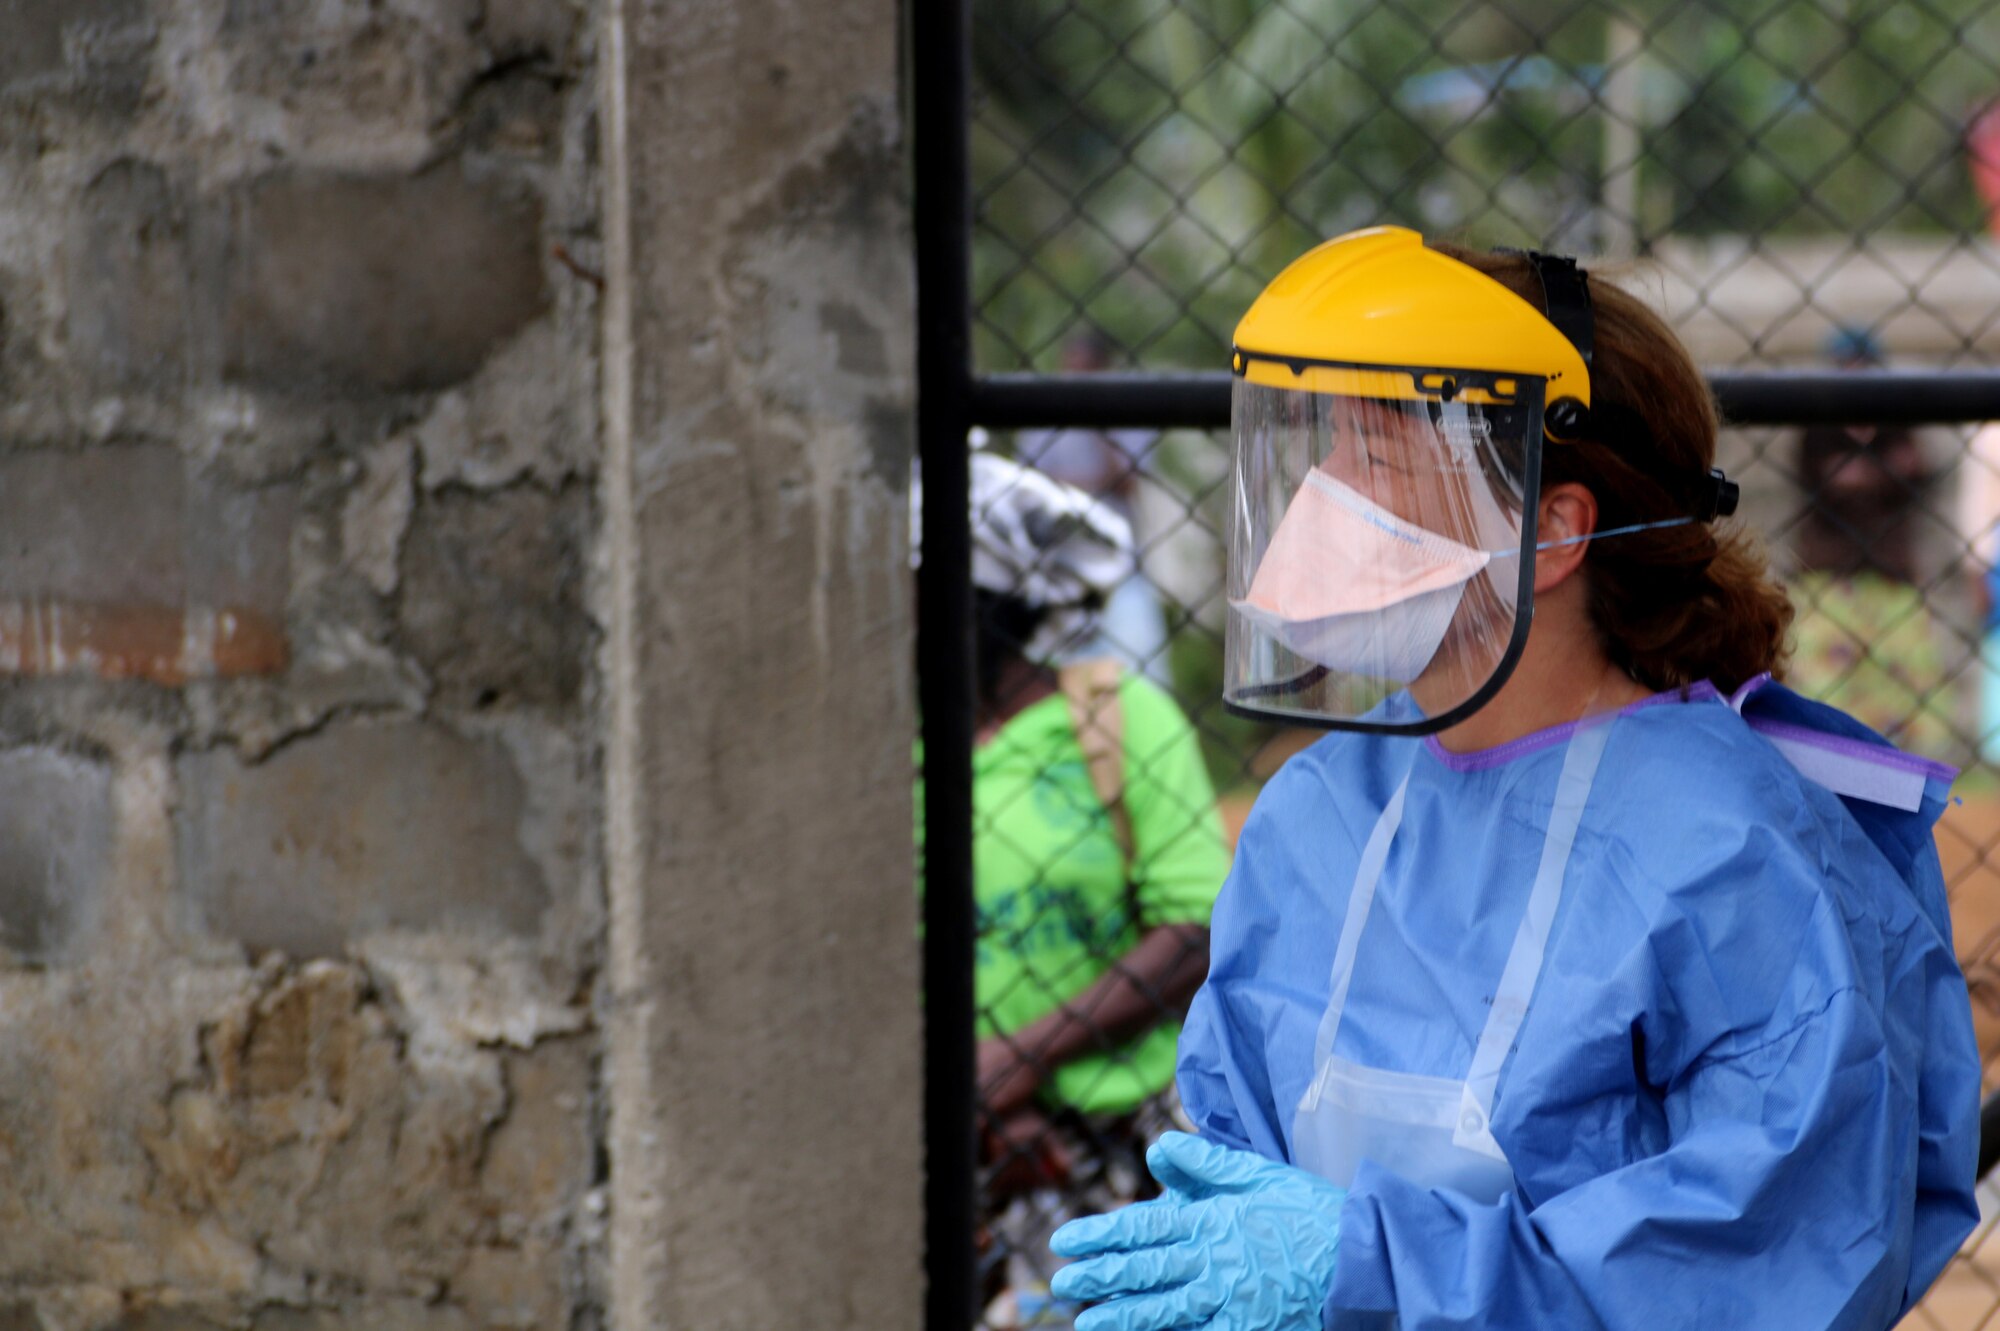 MONROVIA, Liberia – A health care worker wears protective clothing at a field hospital in Monrovia, Liberia Sept. 19, 2014. The workers are among volunteers from around the world fighting the epidemic outbreak of Ebola. (Photo/Maj. Francis Obuseh)